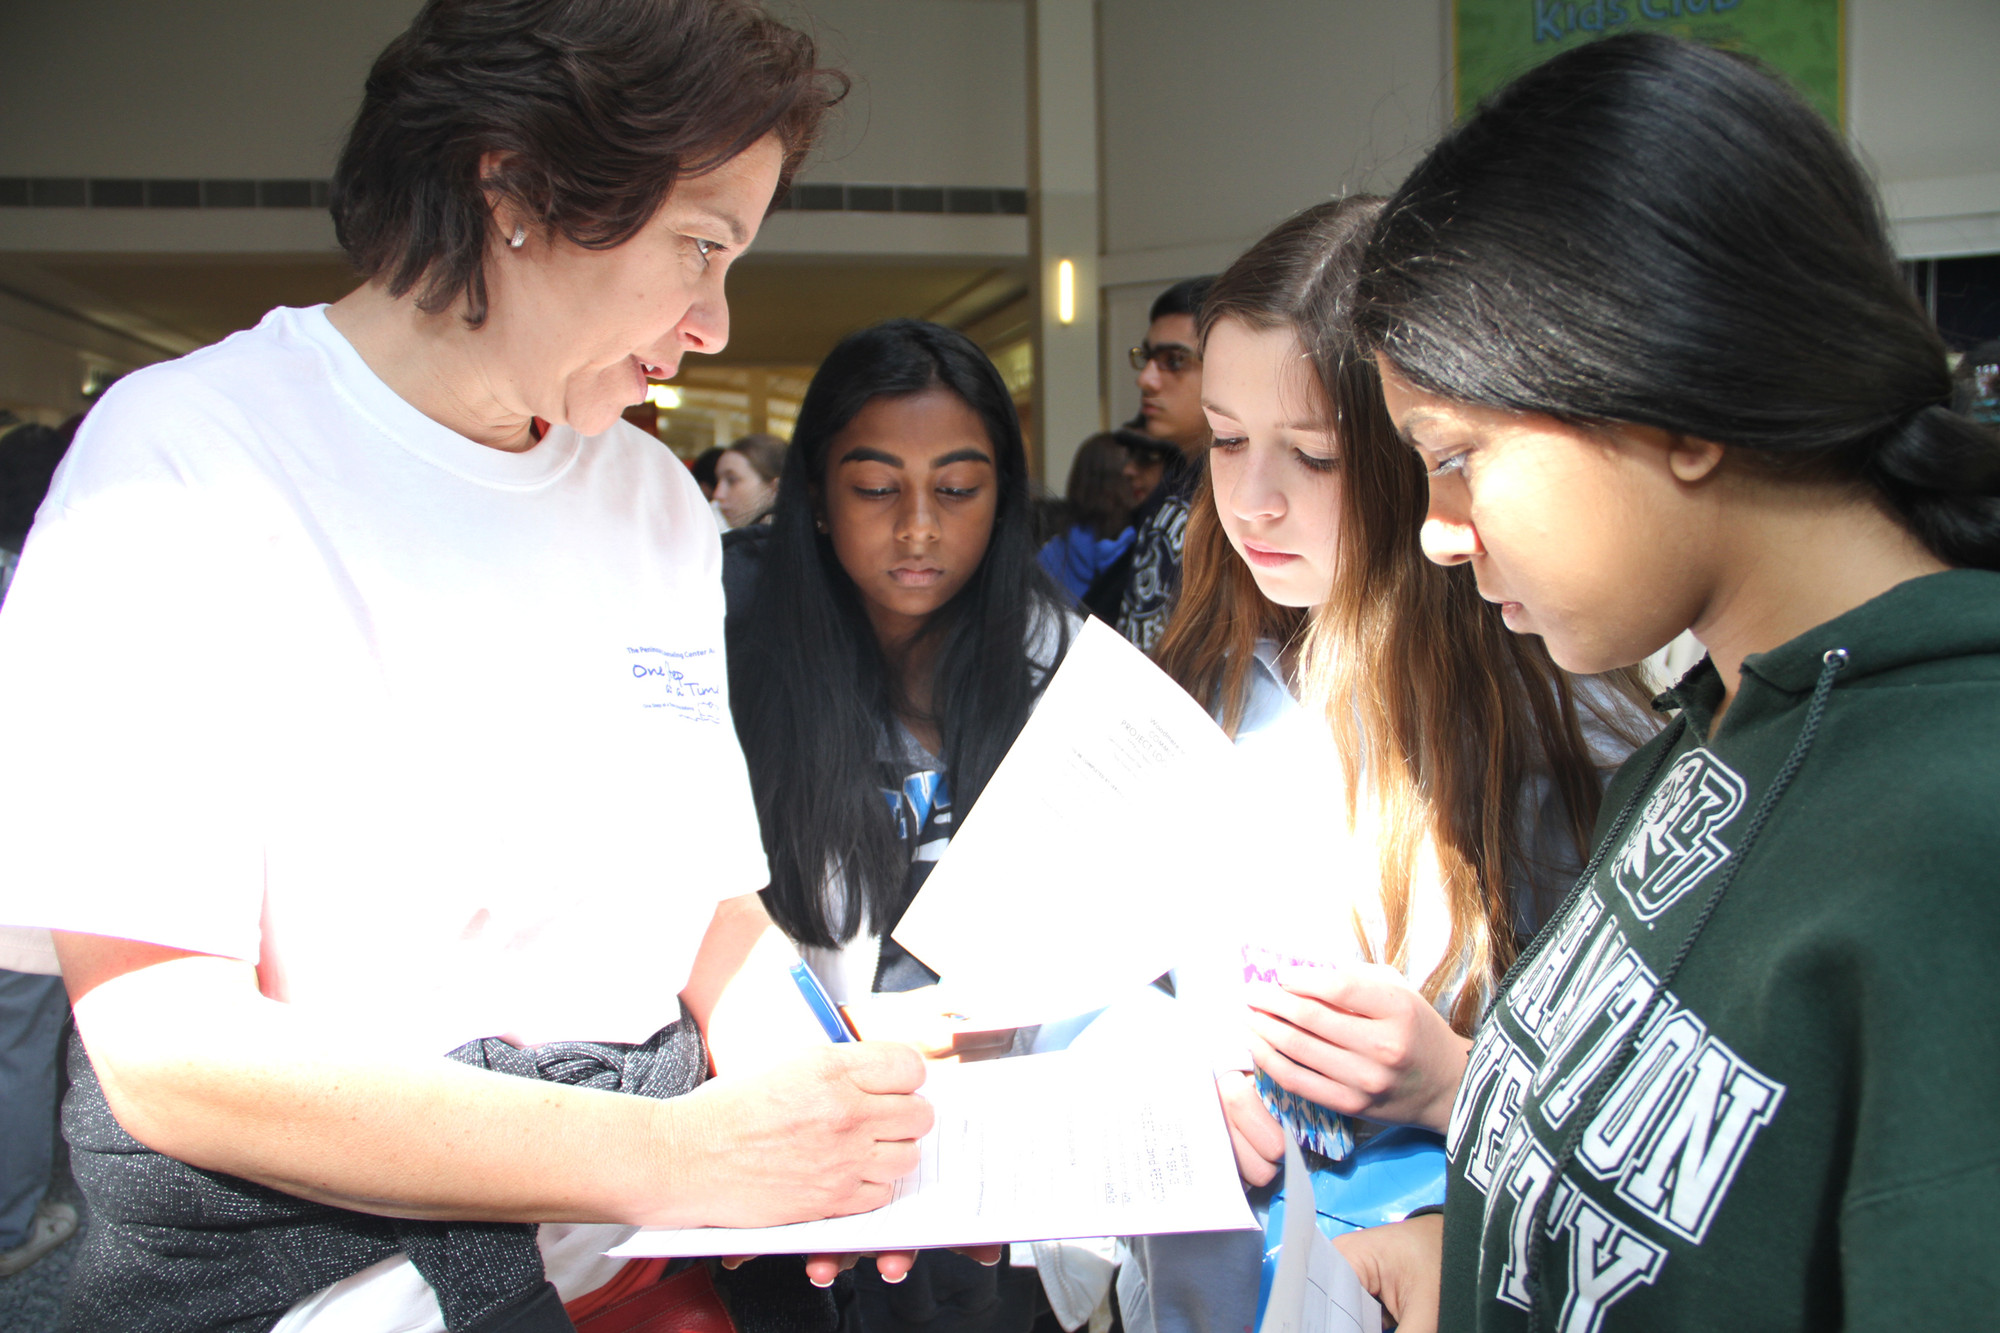 Judy Rivlin signed up students Avani Lall, Kristin McIness and Arham Ansari for the walk.